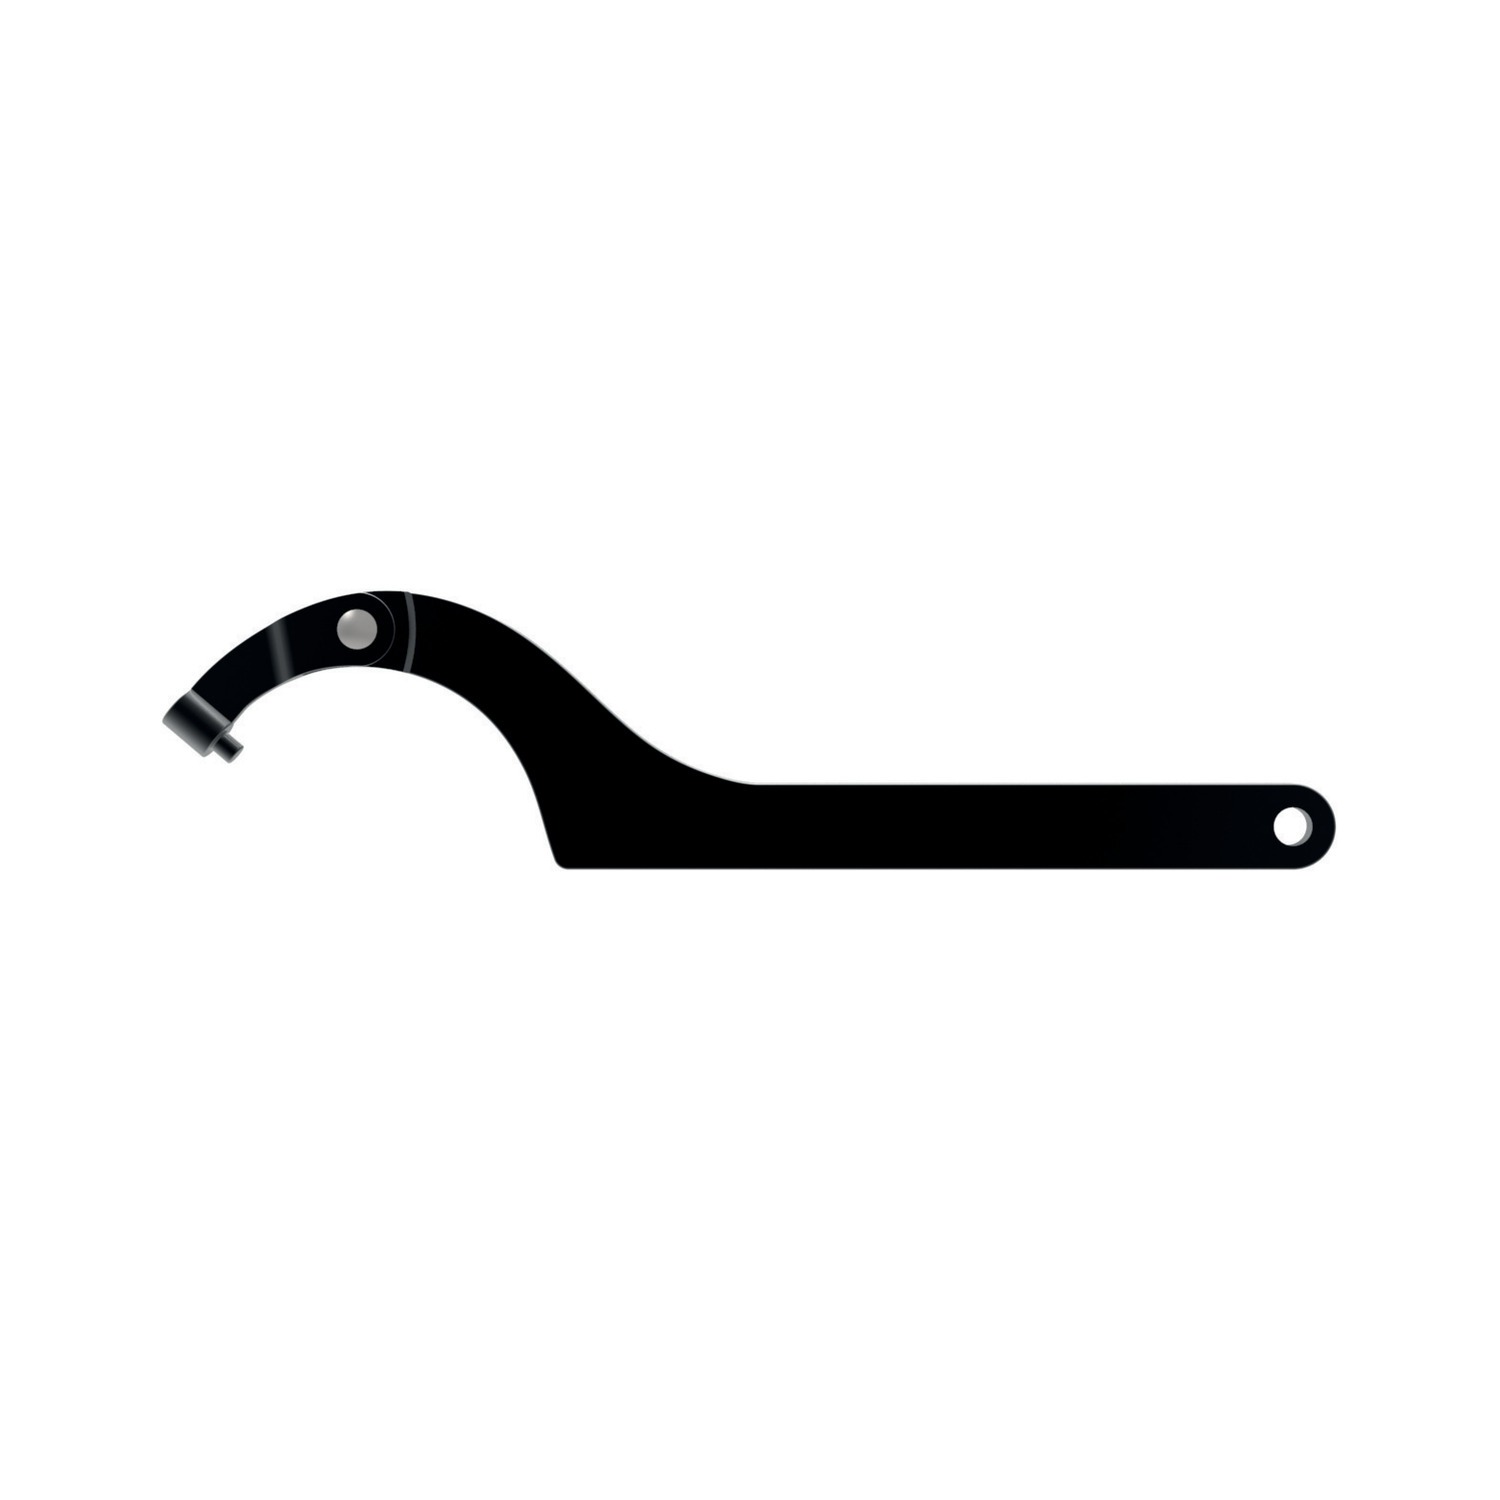 Product 95152, Hook Spanners - with Pin Nose hinge type - long version / 